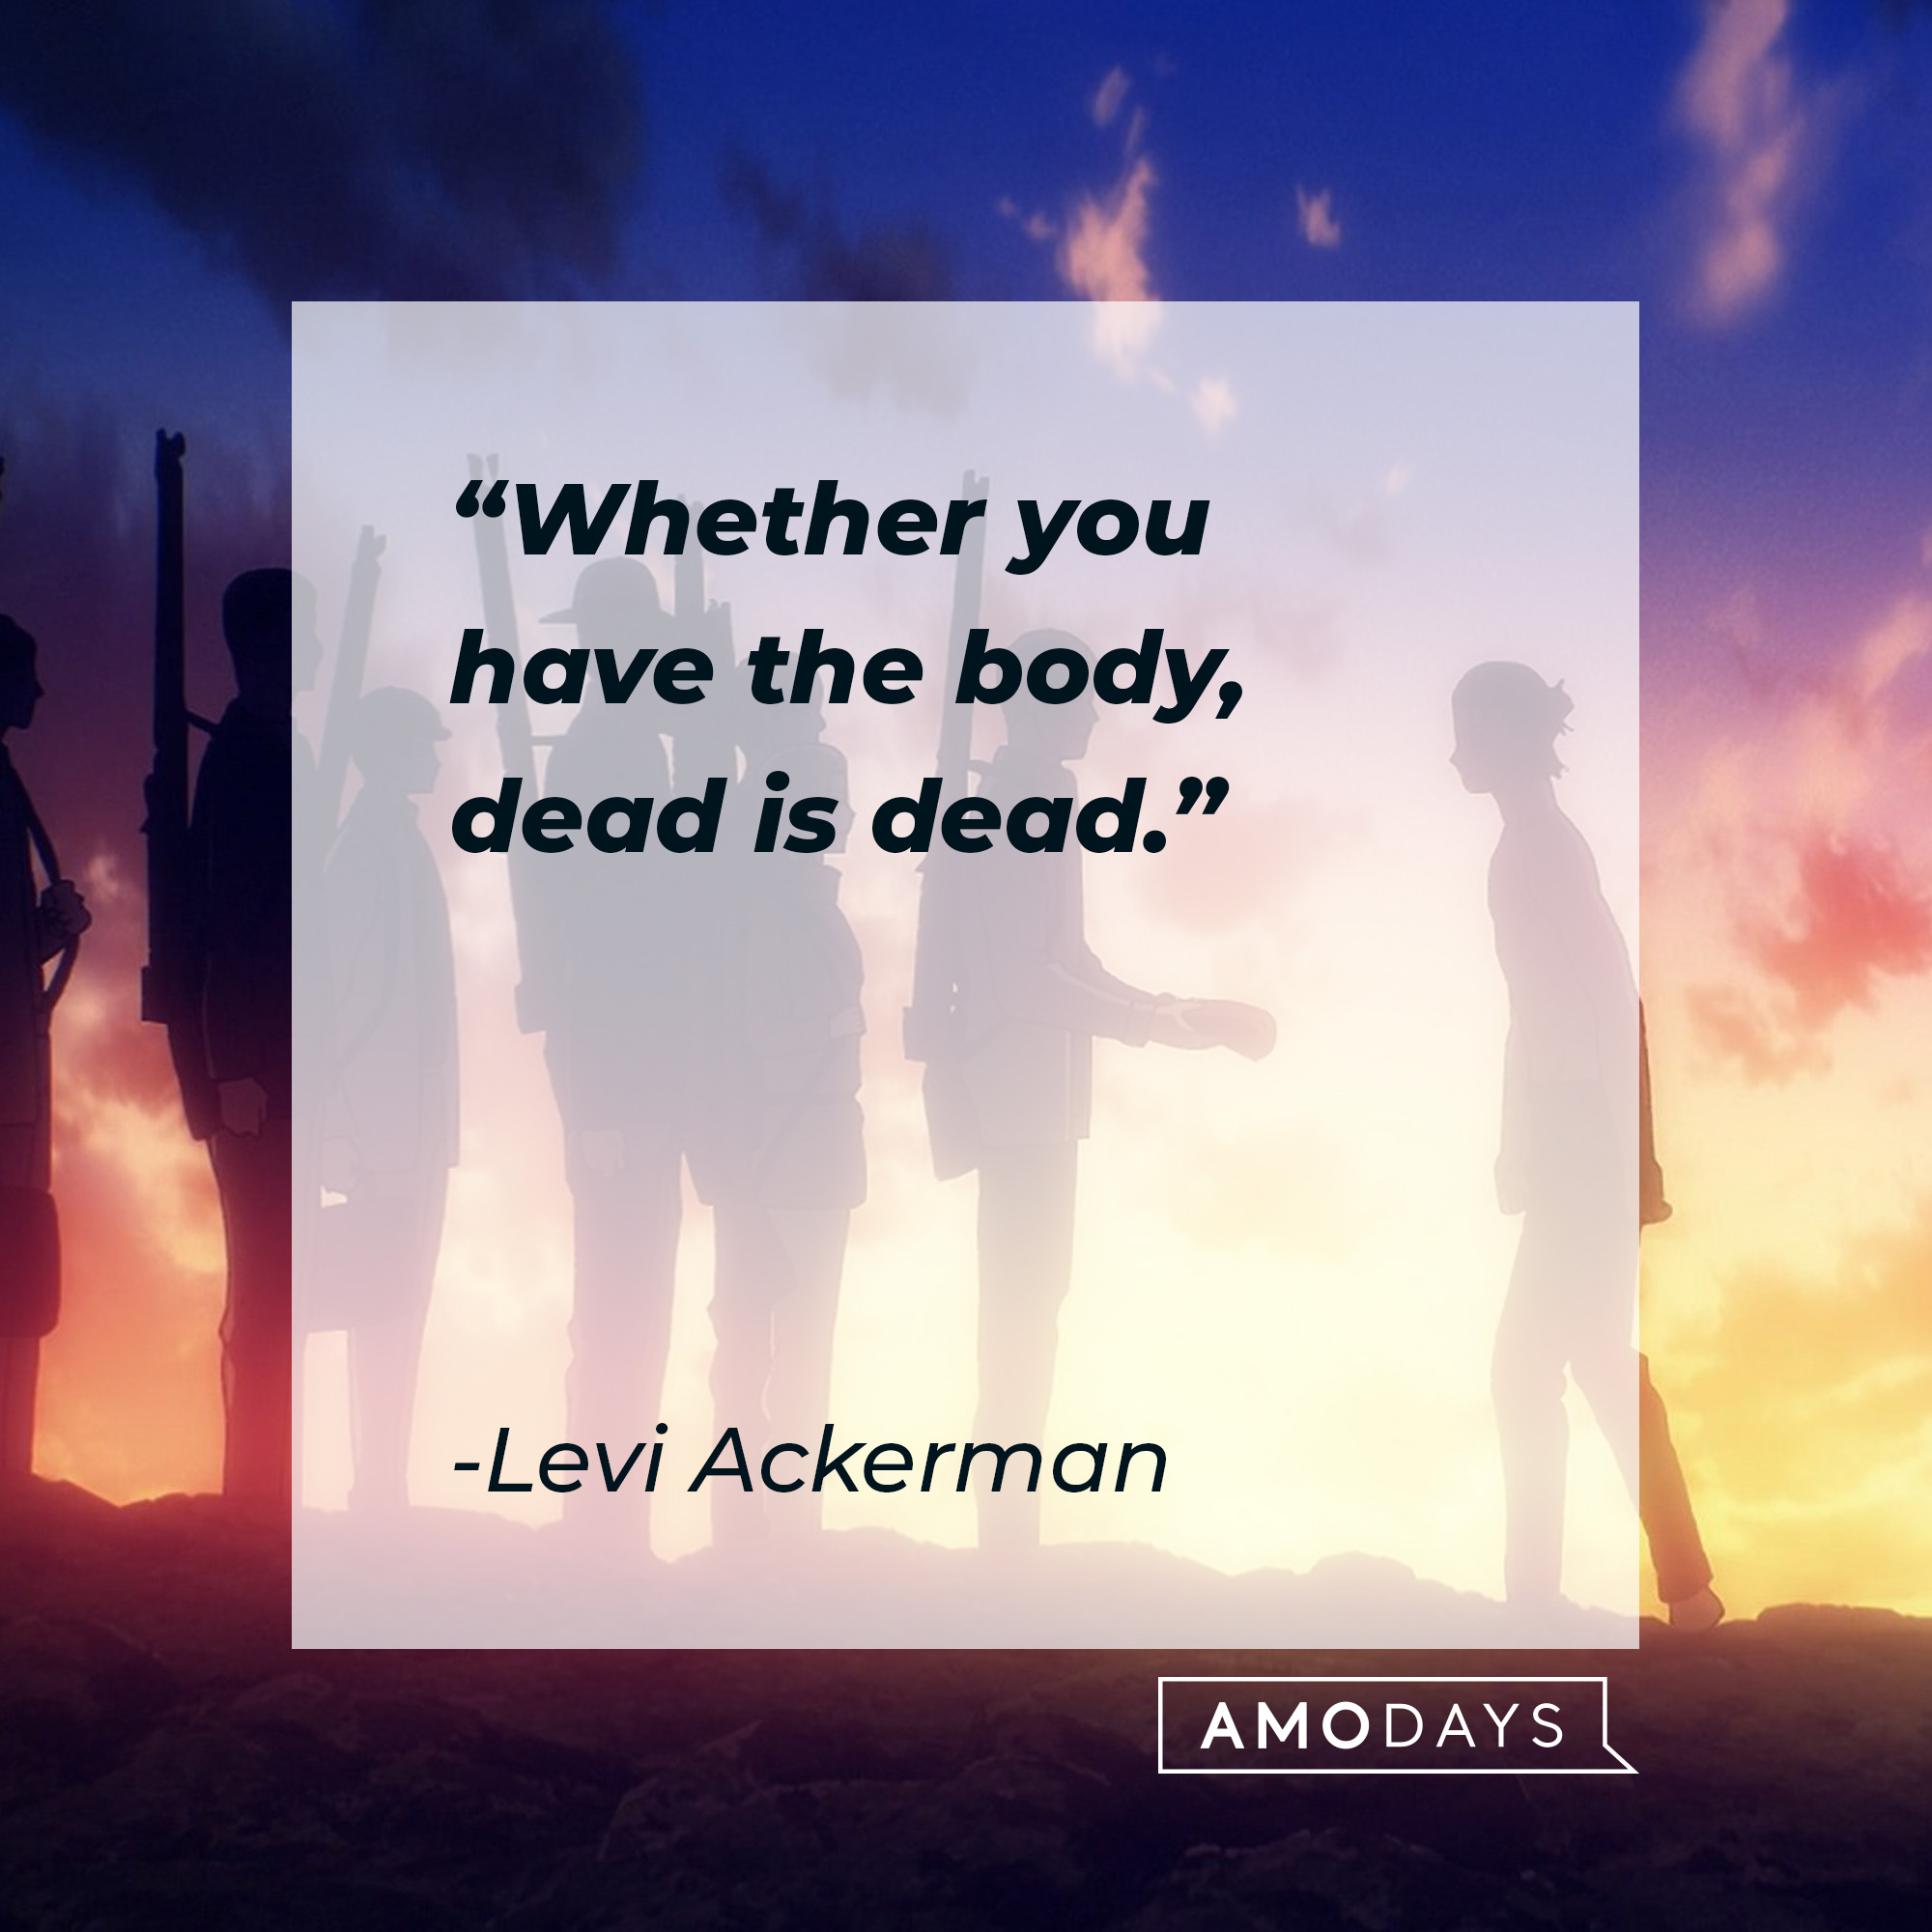 An image from “Attack on Titan,” with Levi Ackerman’s quote: "Whether you have the body, dead is dead.” │Source: facebook.com/AttackOnTitan